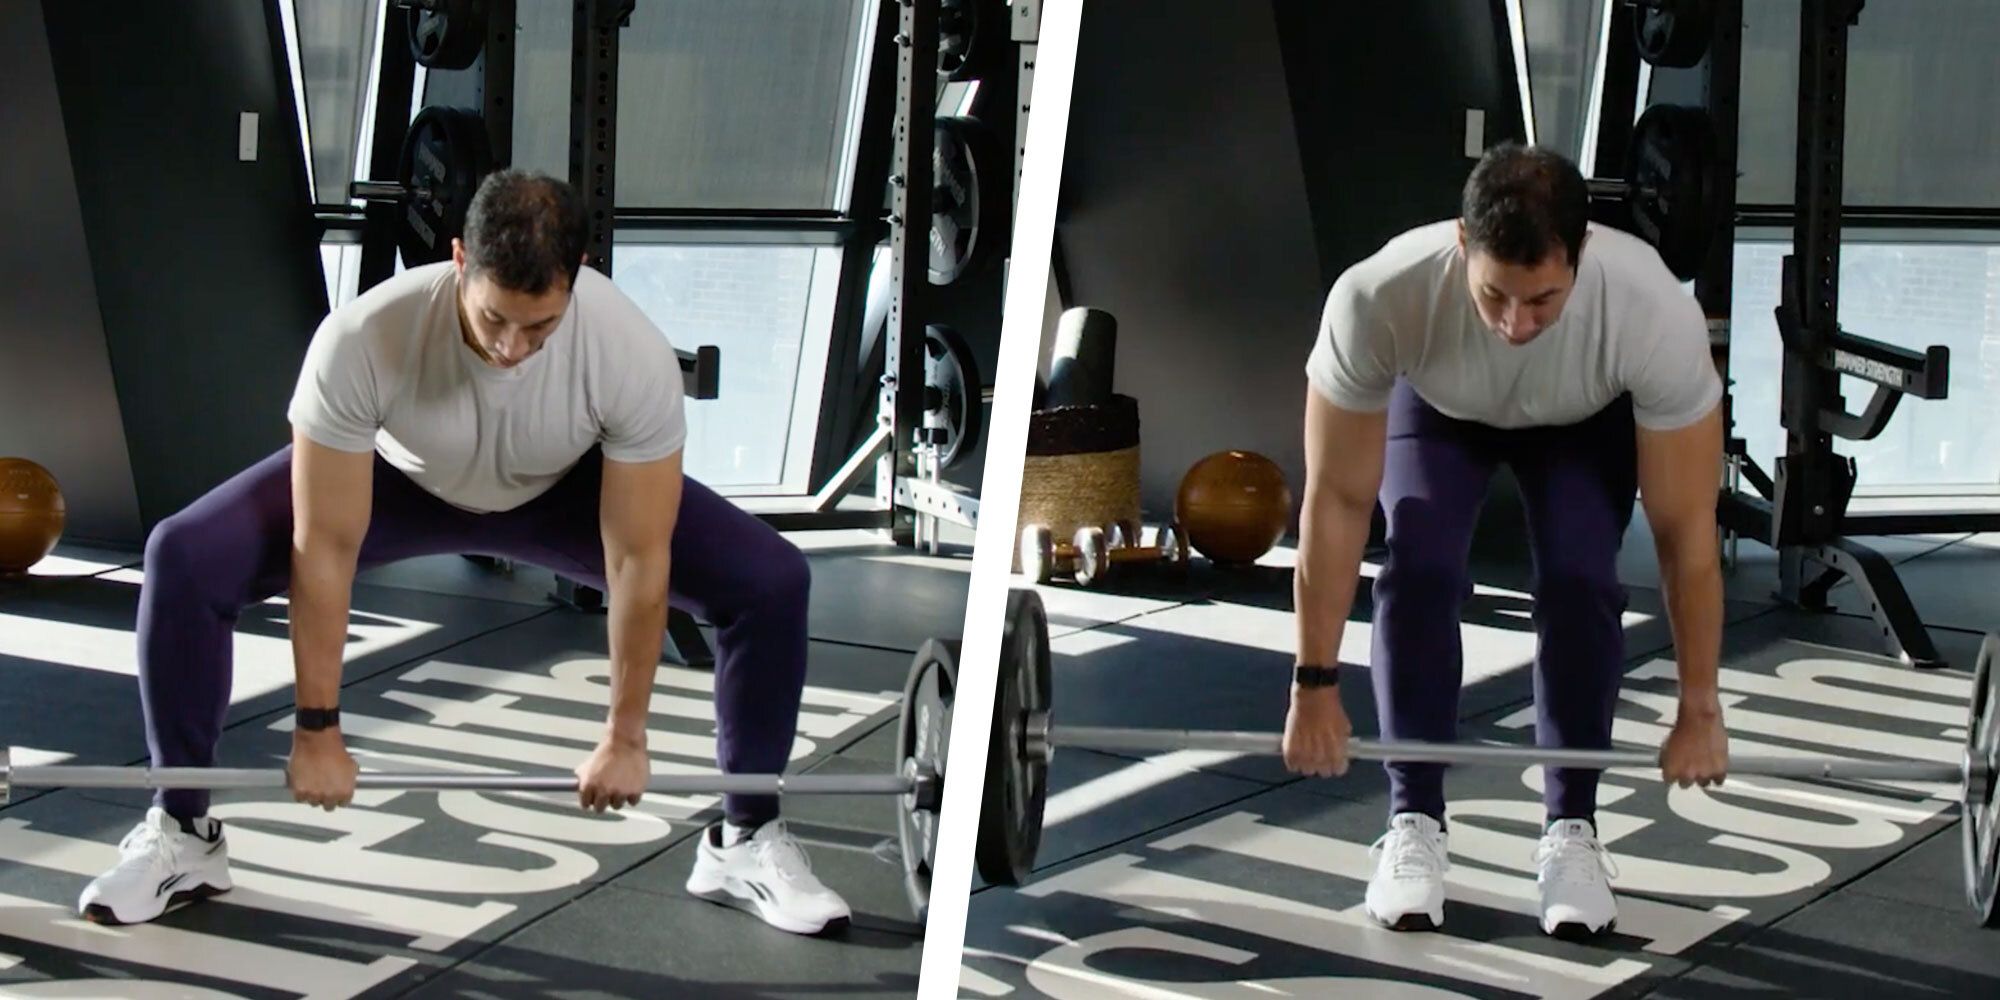 11 Leg Extension Alternatives With Free-Weights, Bands, & Bodyweight